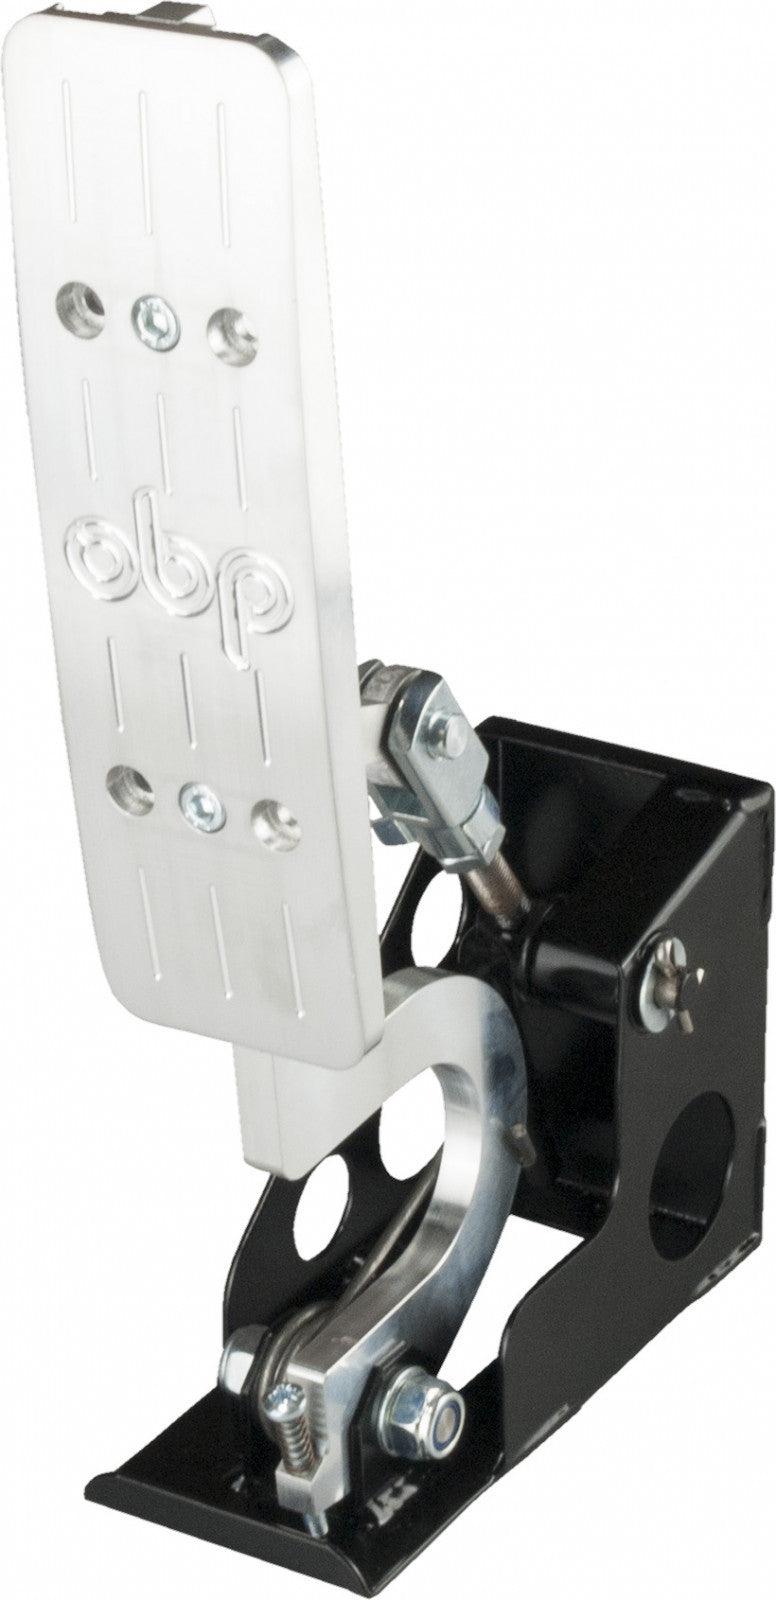 obp Motorsport Pro-Race V2 Floor Mounted Accelerator Pedal Unit (Accelerator) - Attacking the Clock Racing